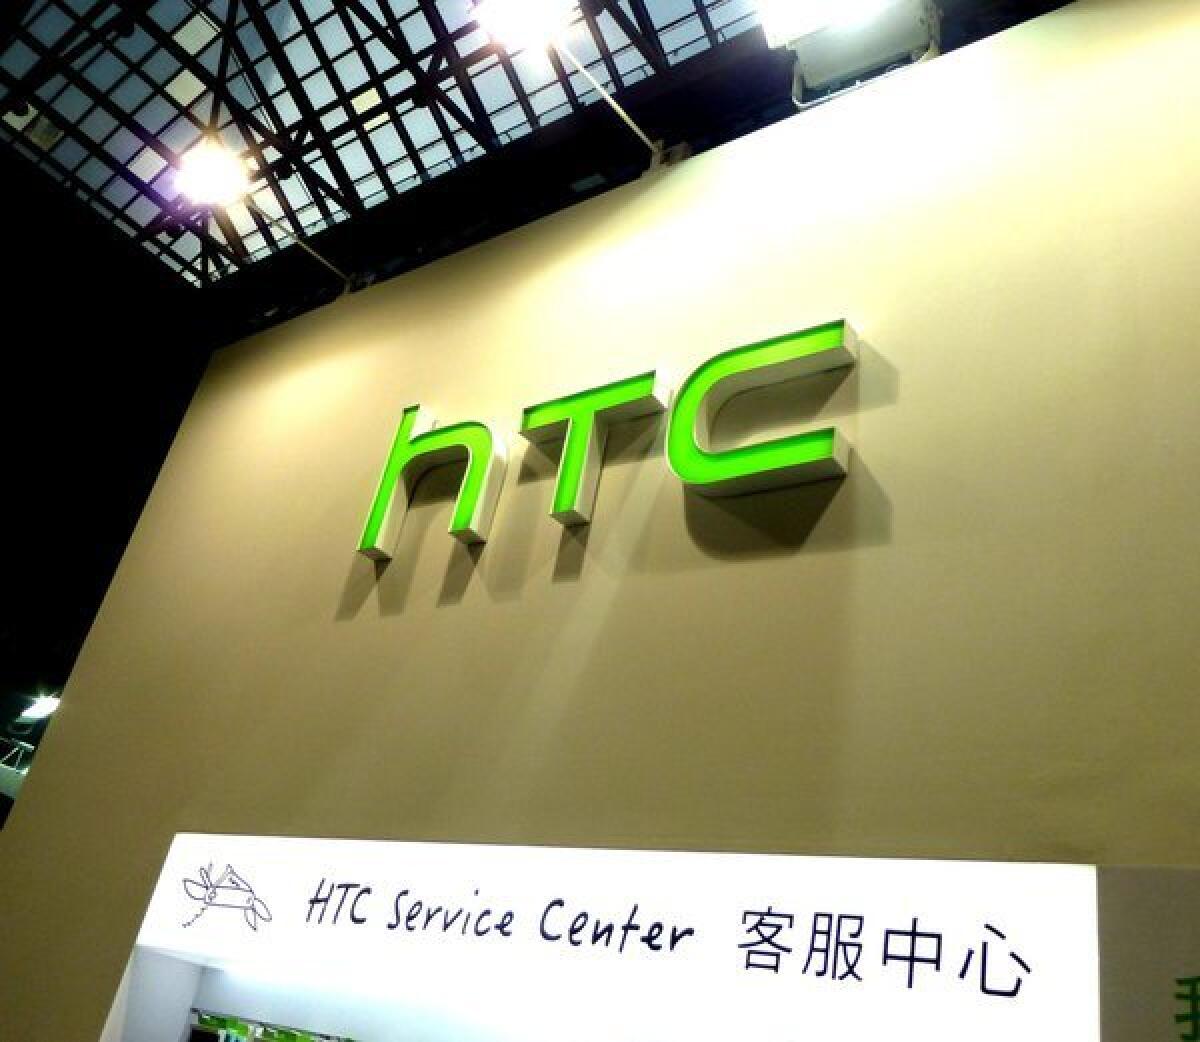 HTC's logo at the 2013 Taipei Computer Application Show in Taiwan. HTC is said to be working on a smartwatch.